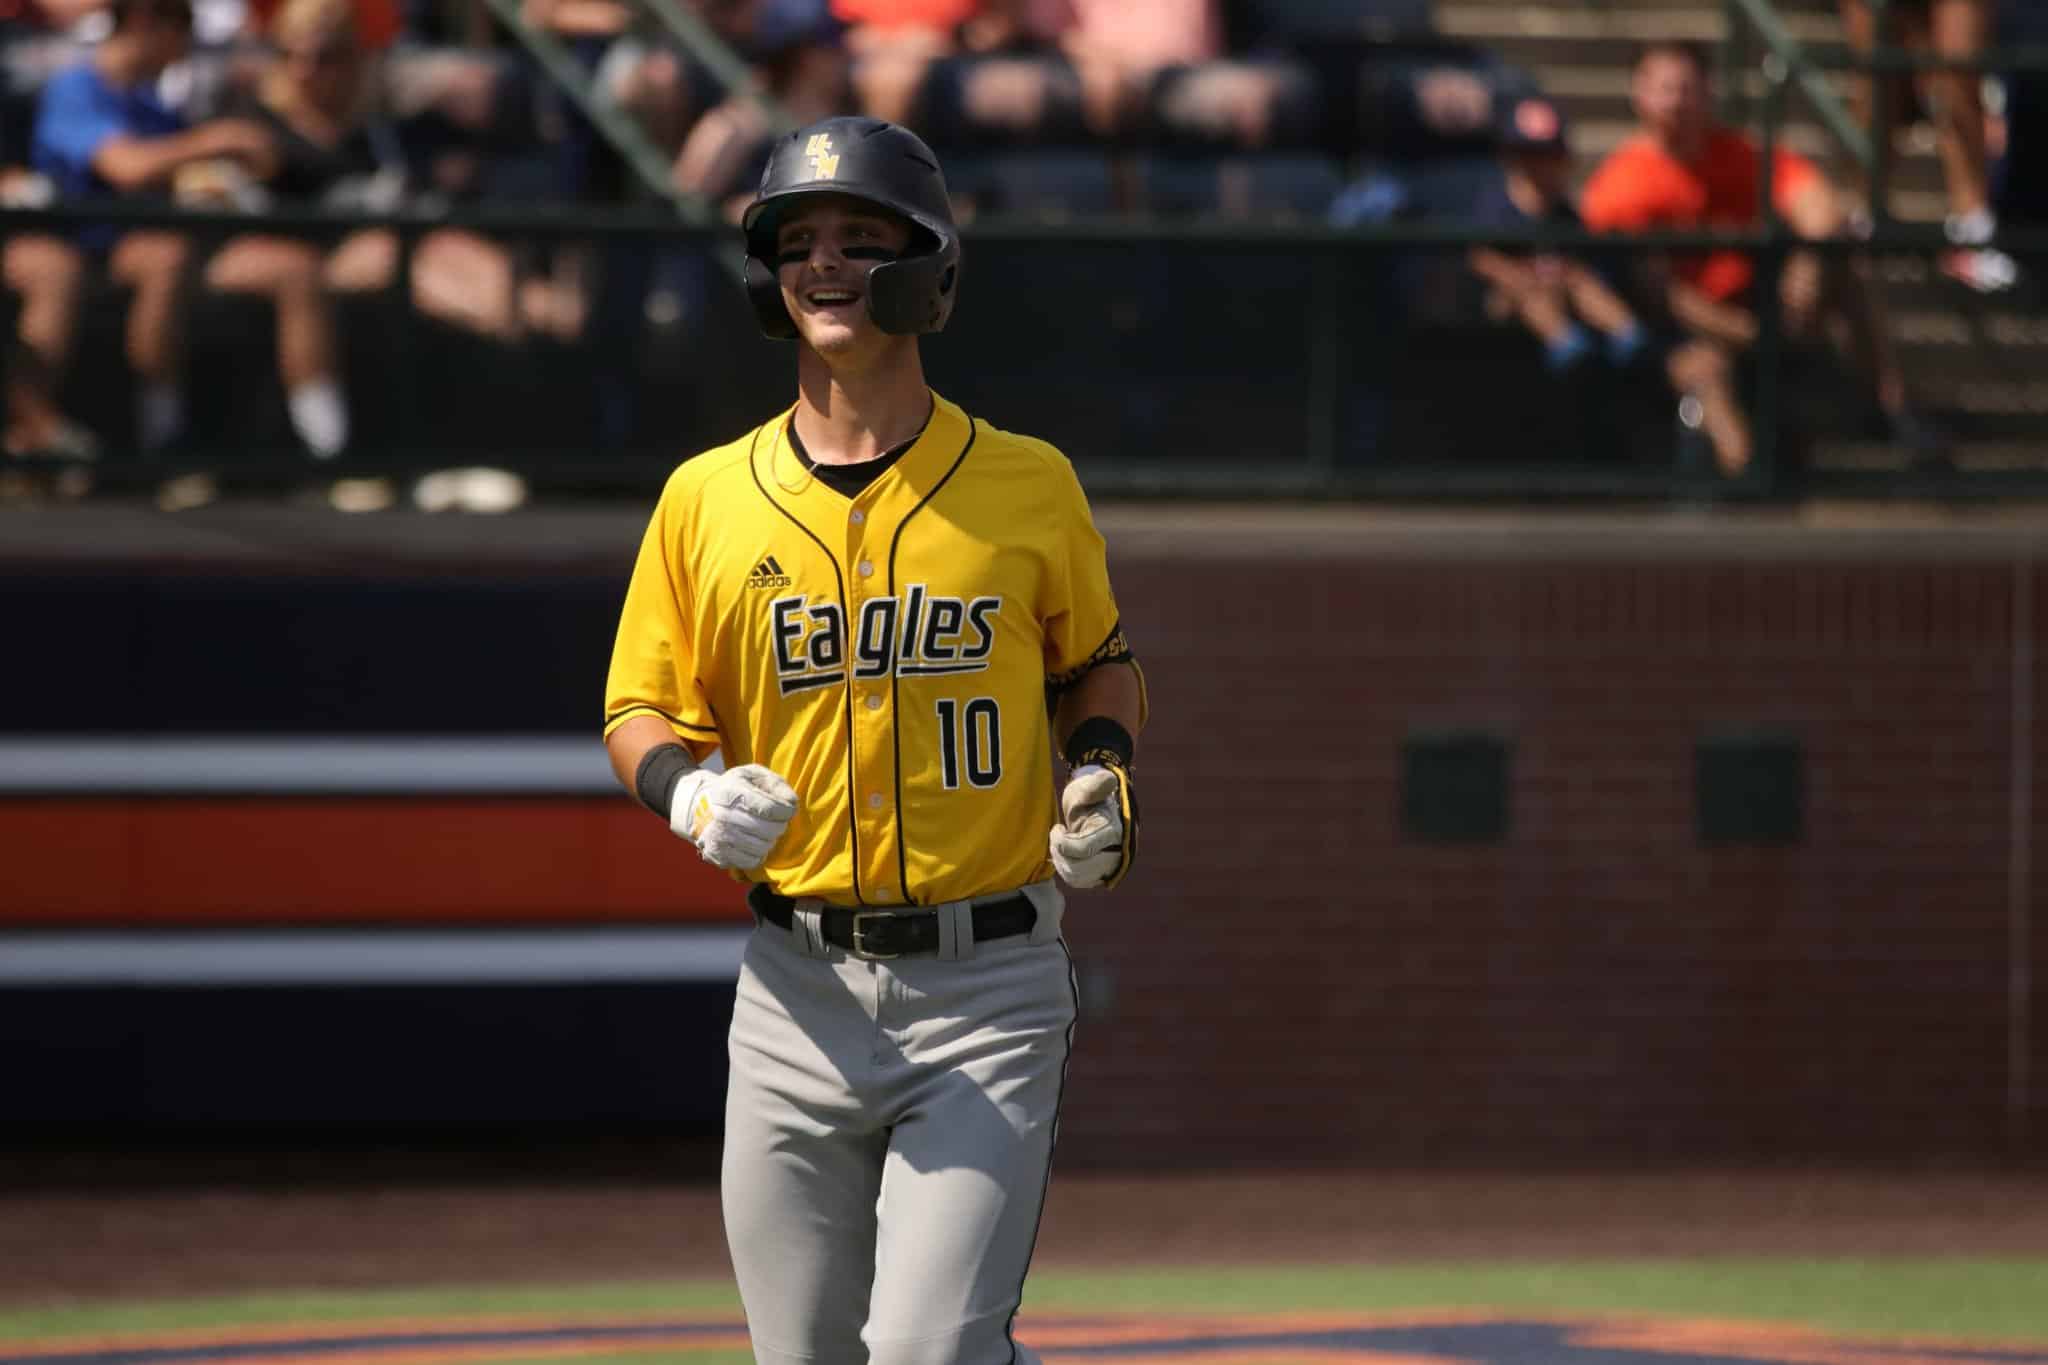 Southern Miss cruises past Auburn 7-2 to advance in regional